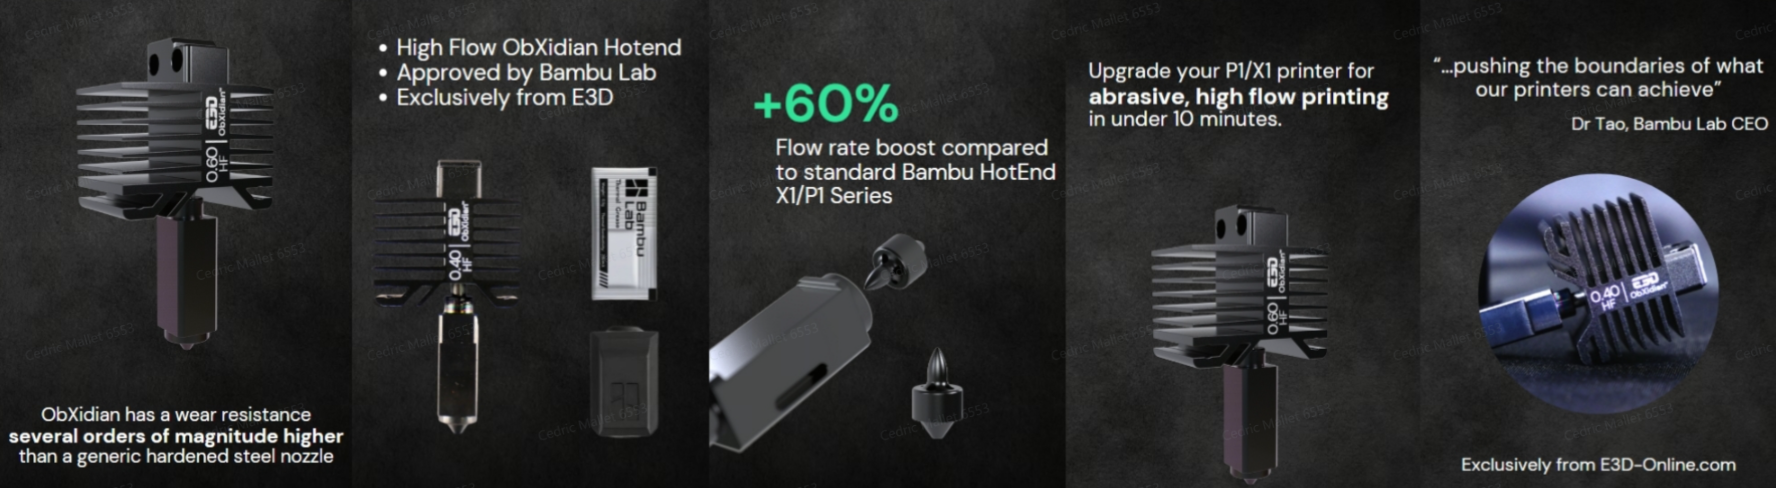 Bambu Lab x E3D: Our First Step to Embrace the Aftermarket